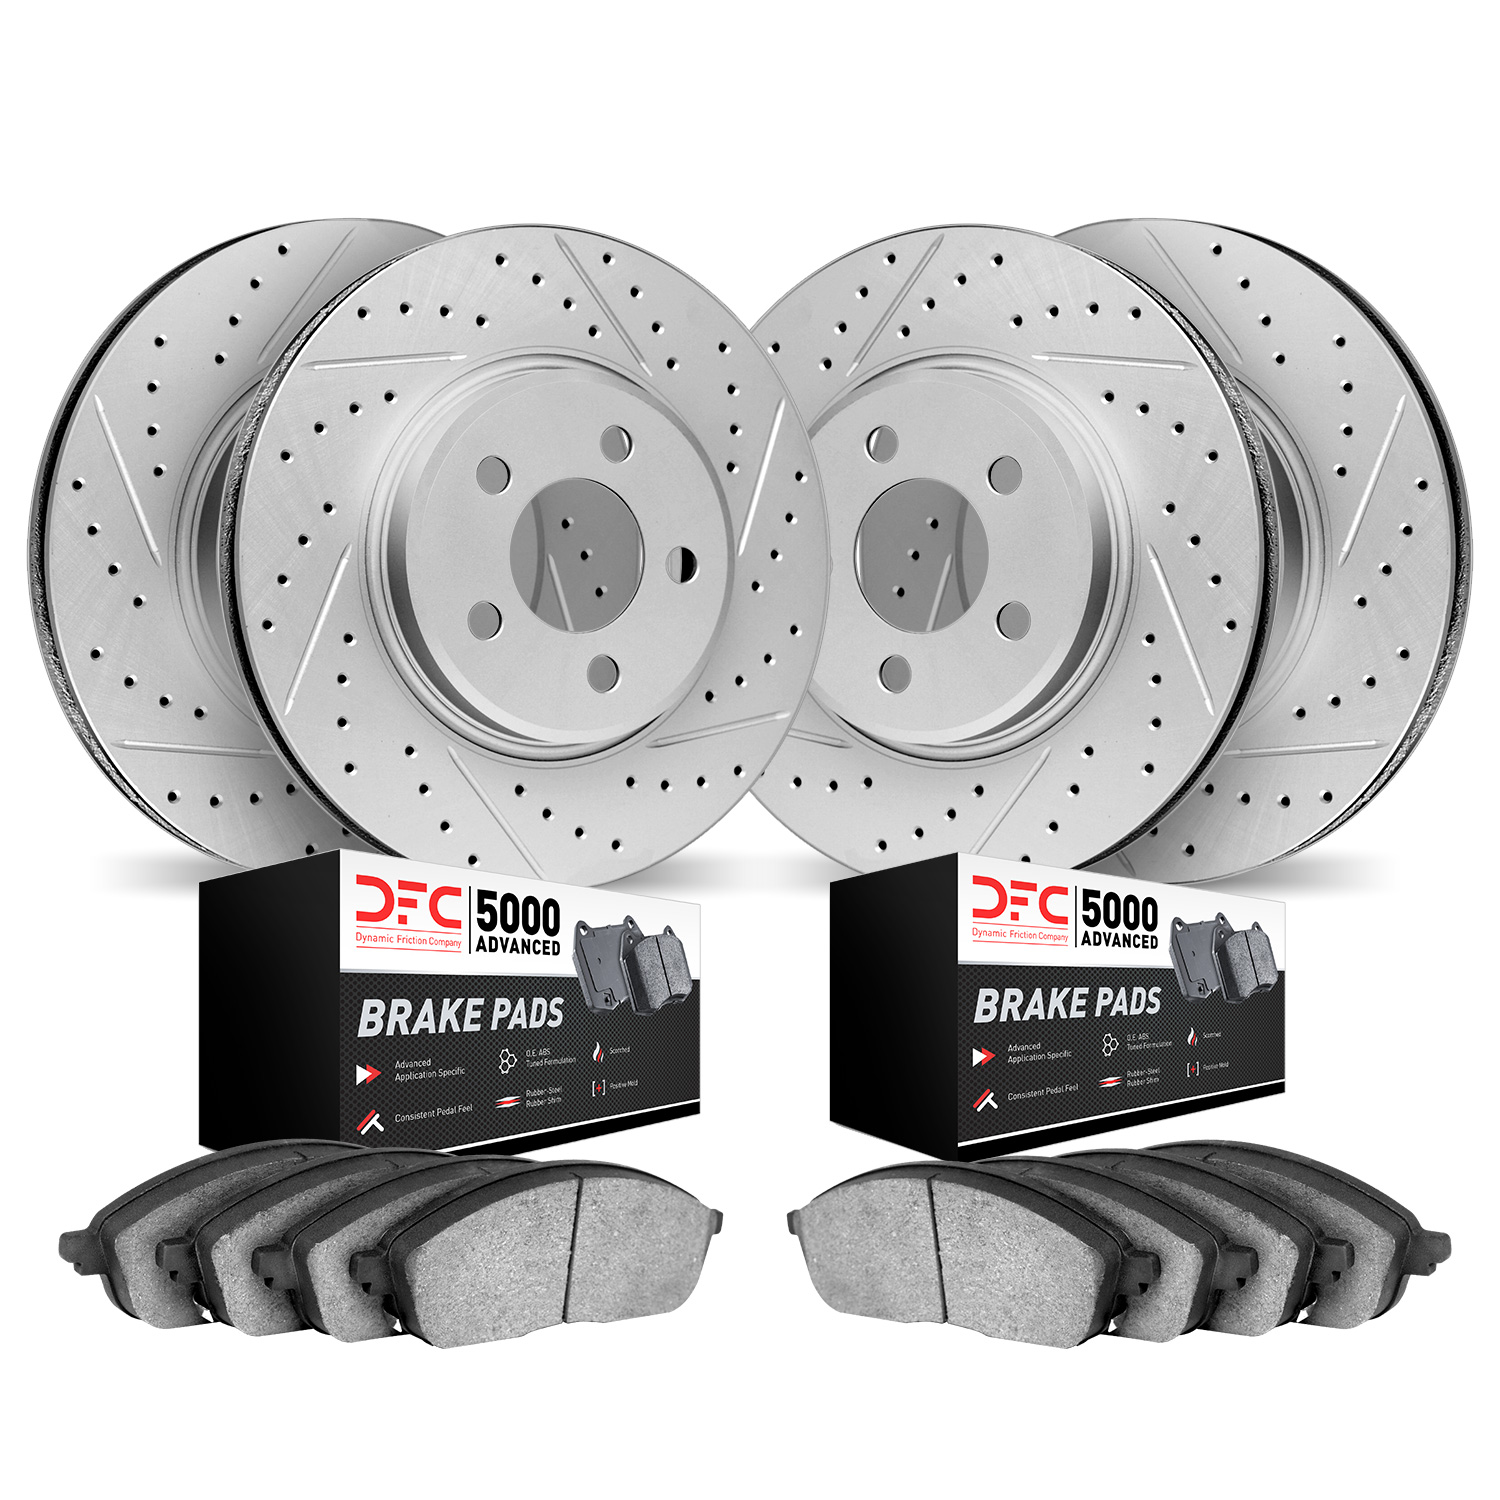 2504-11003 Geoperformance Drilled/Slotted Rotors w/5000 Advanced Brake Pads Kit, 2017-2017 Land Rover, Position: Front and Rear